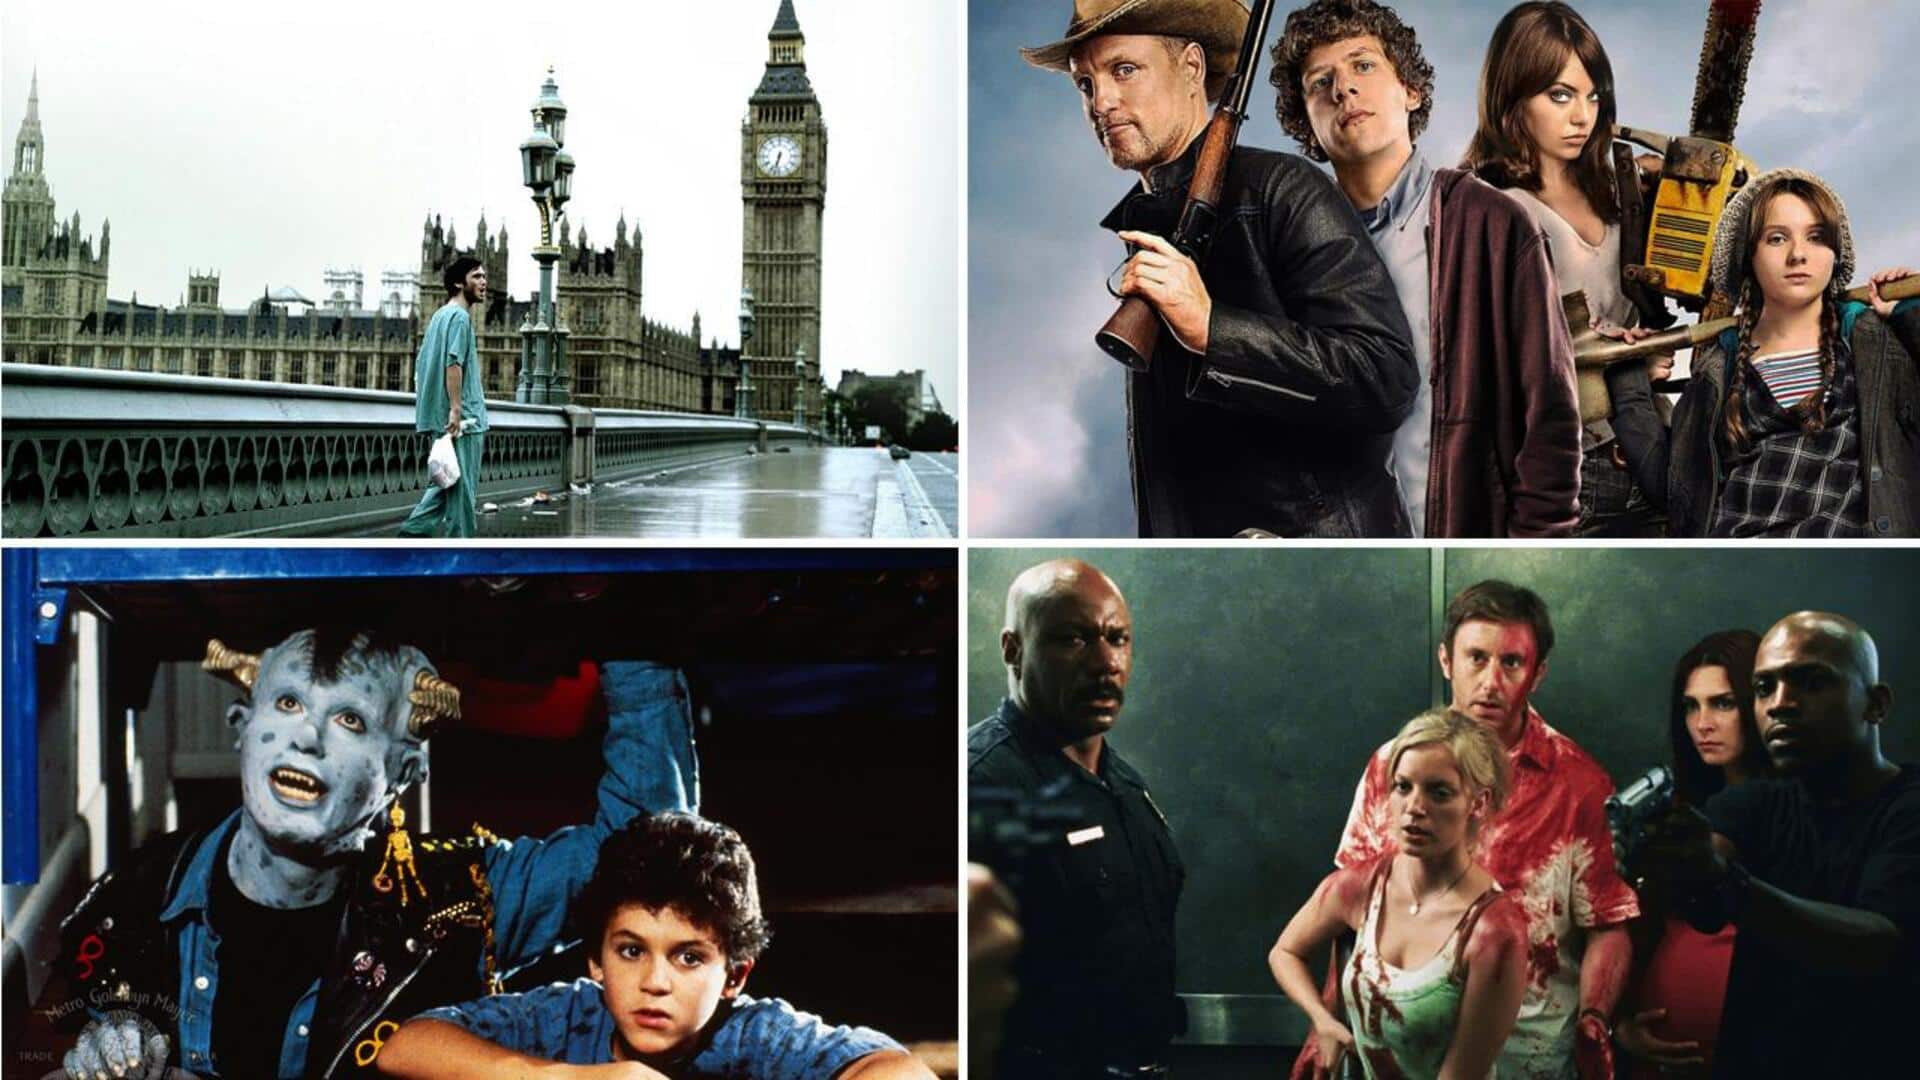 '28 Days Later' to 'Zombieland': Best Hollywood zombie movies